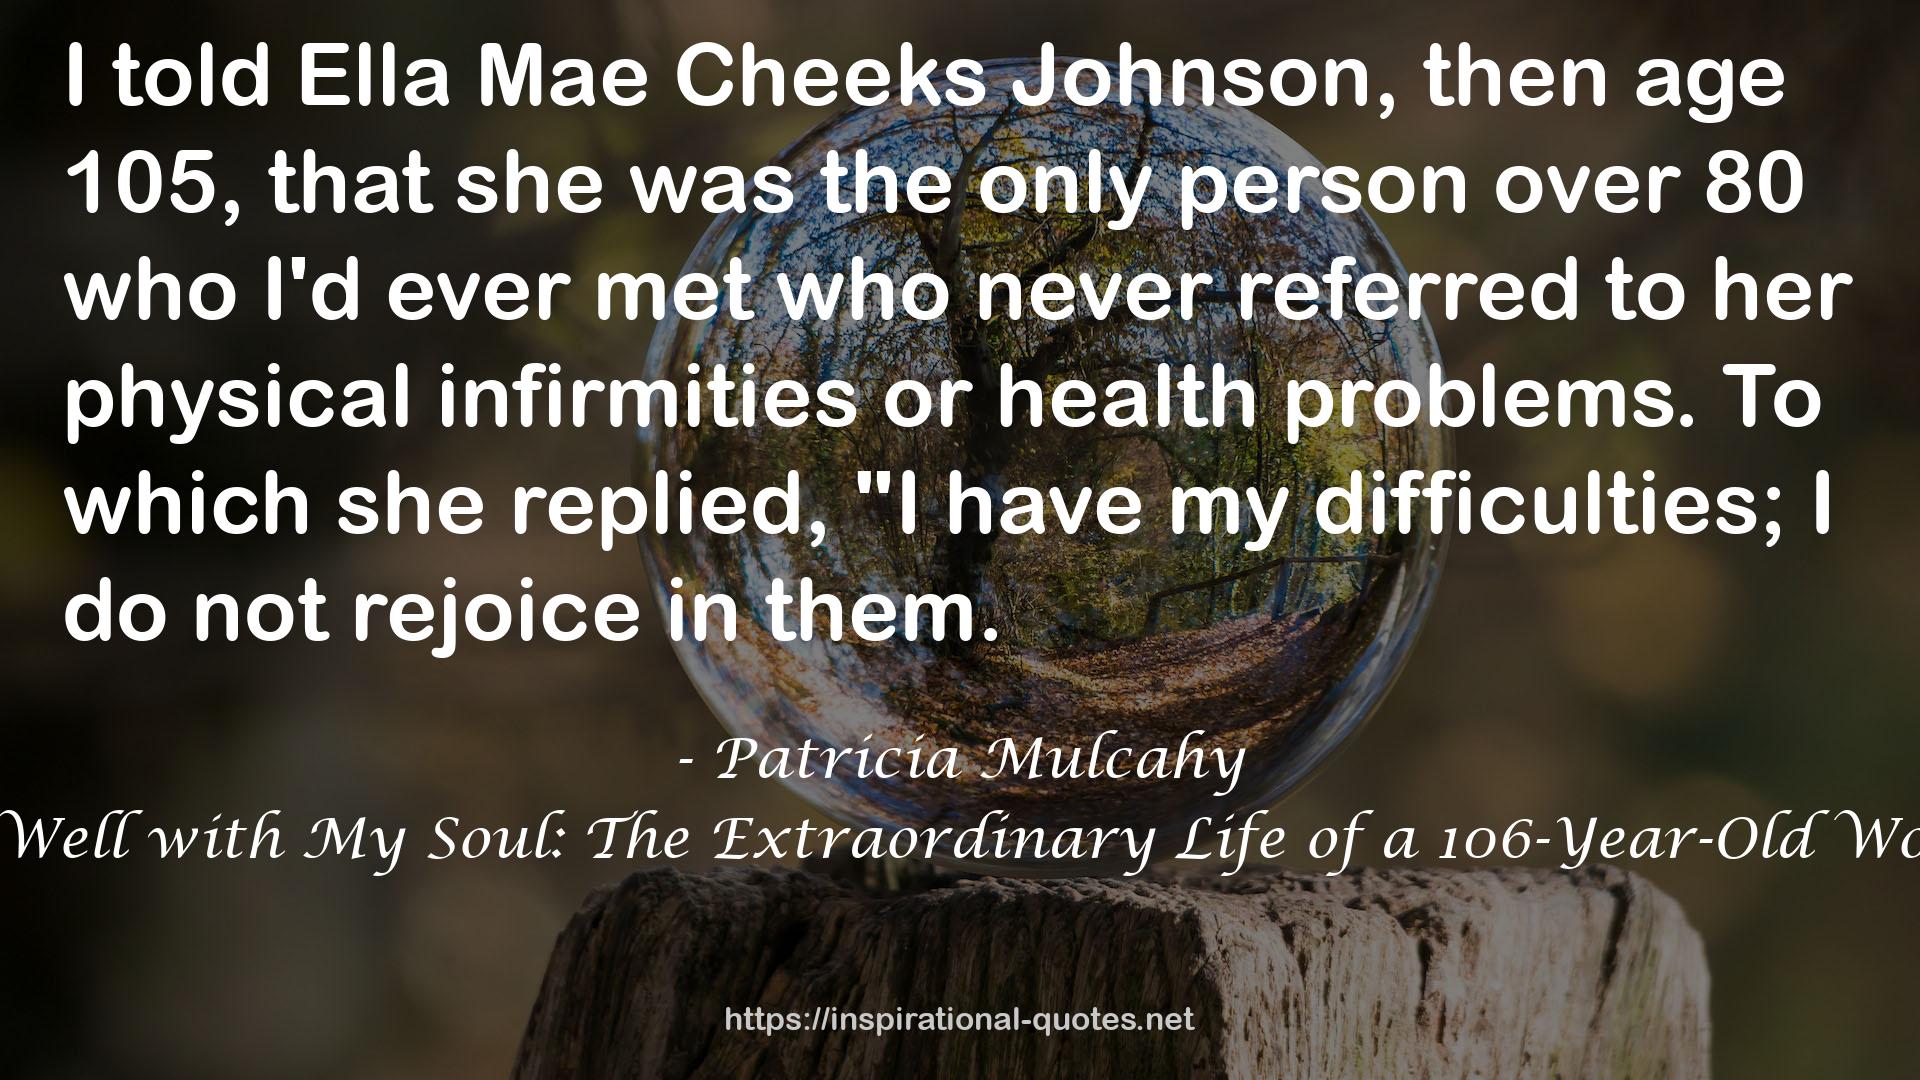 It Is Well with My Soul: The Extraordinary Life of a 106-Year-Old Woman QUOTES